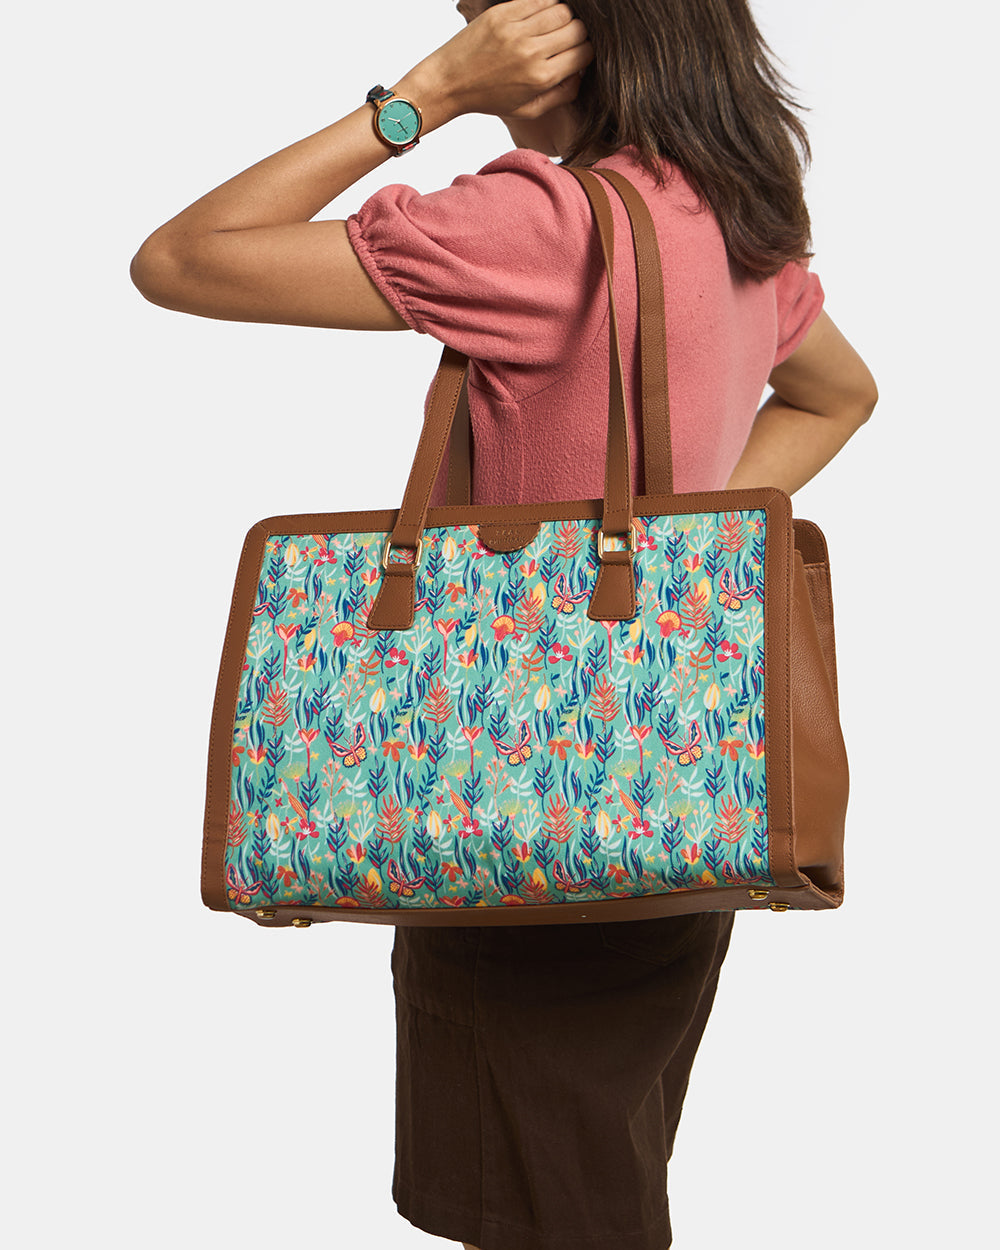 Teal by Chumbak |Tokyo Blooms Office Tote